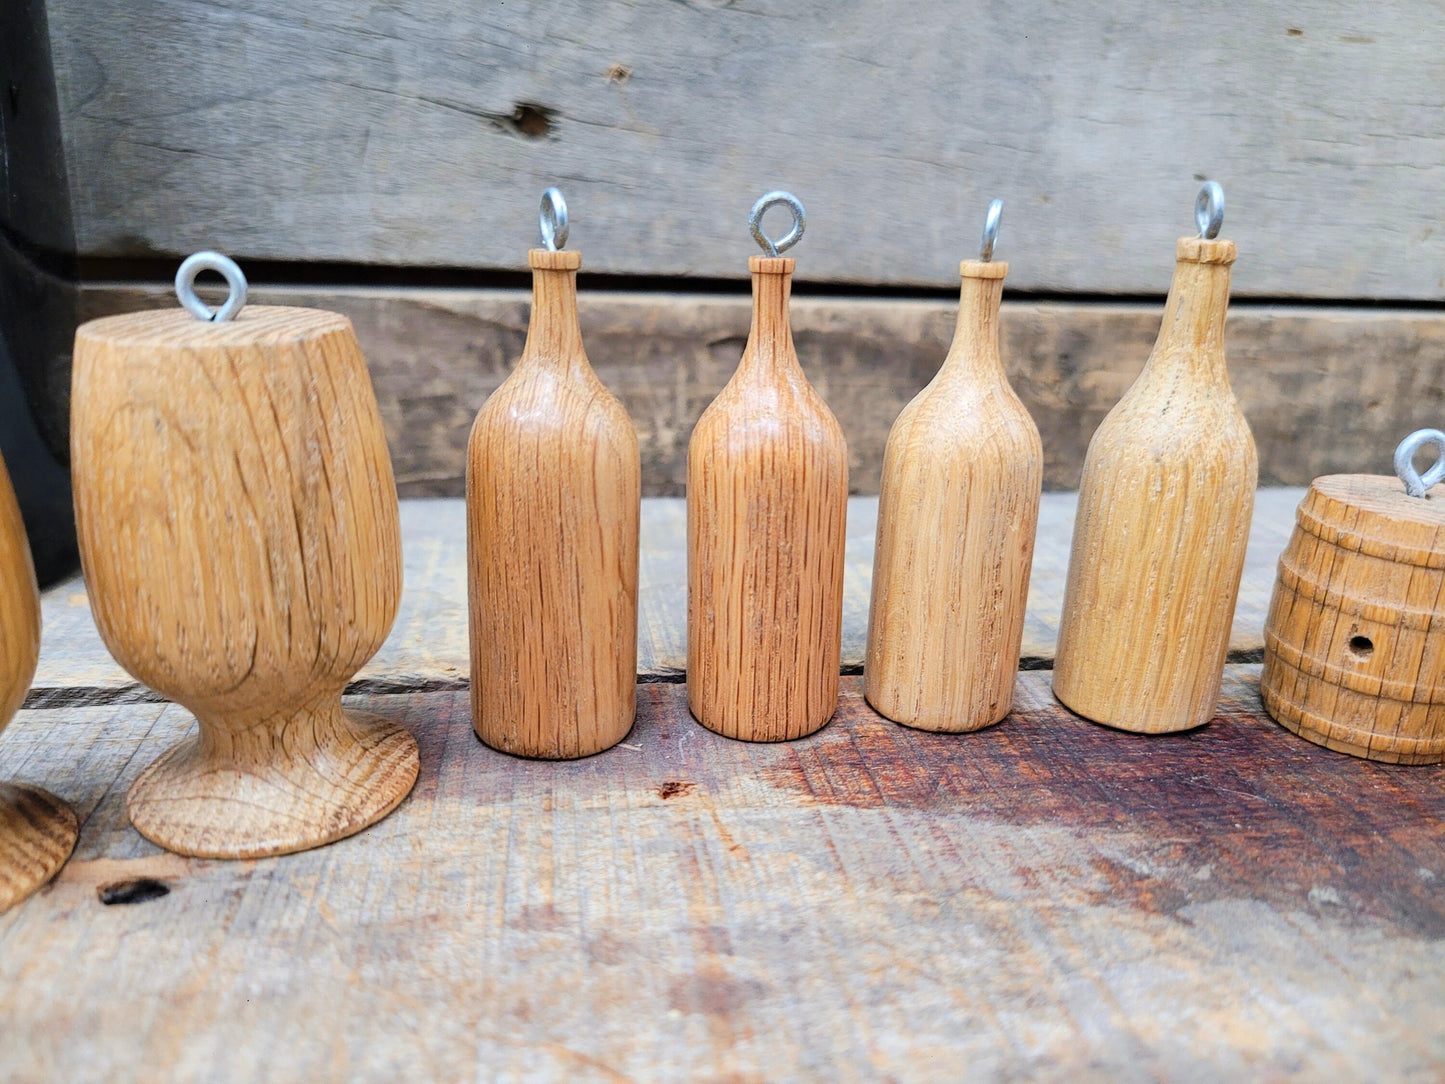 SALE LOT of 12 Wine Barrel Ornaments Hand turned from retired Napa wine barrels 100% Recycled + Ready to Ship!